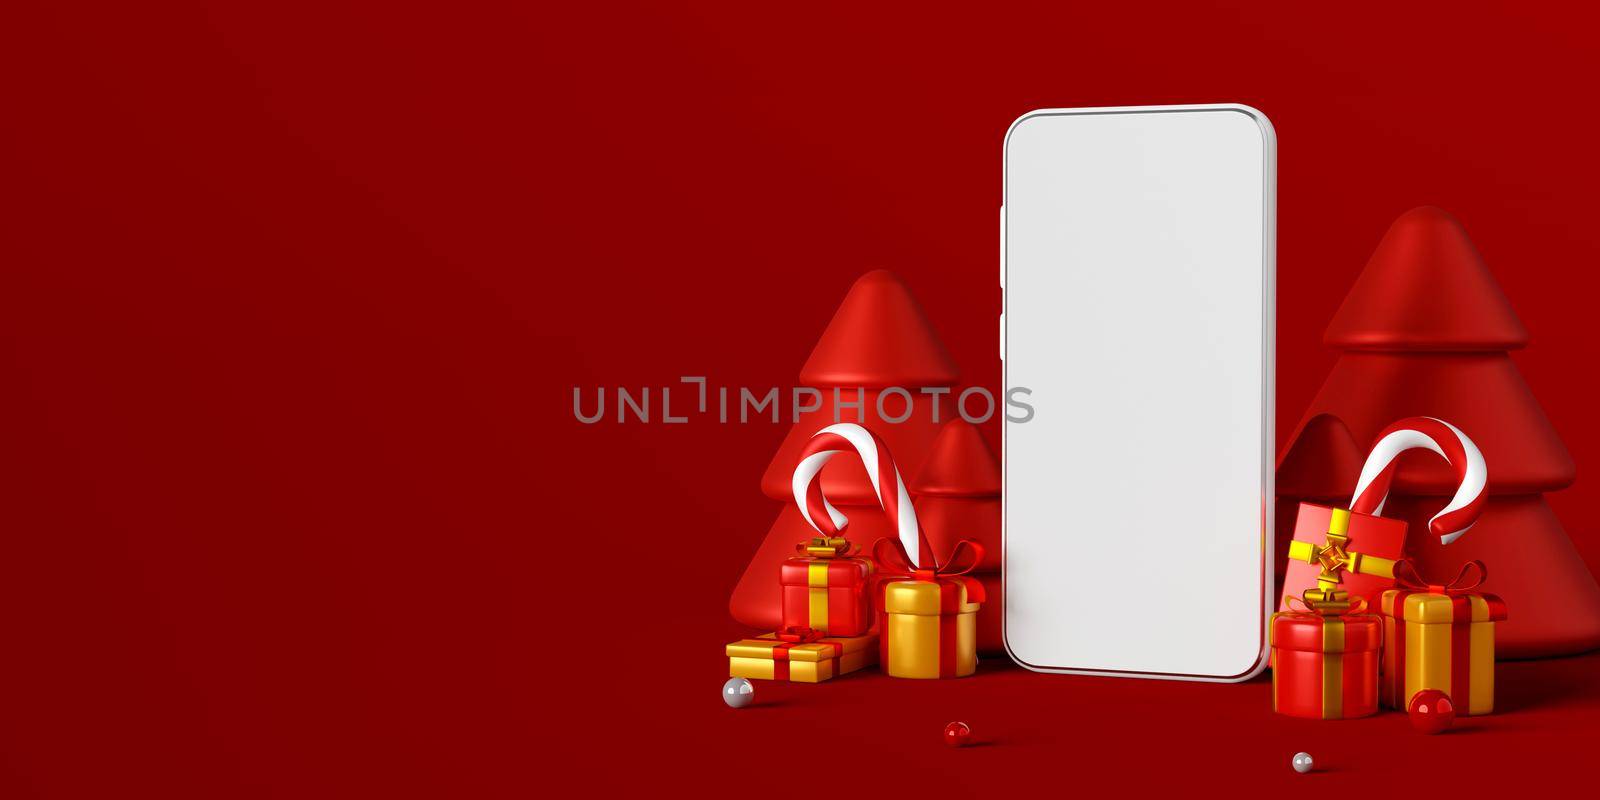 Scene of Smartphone with Christmas gift for shopping online advertisement, 3d illustration by nutzchotwarut